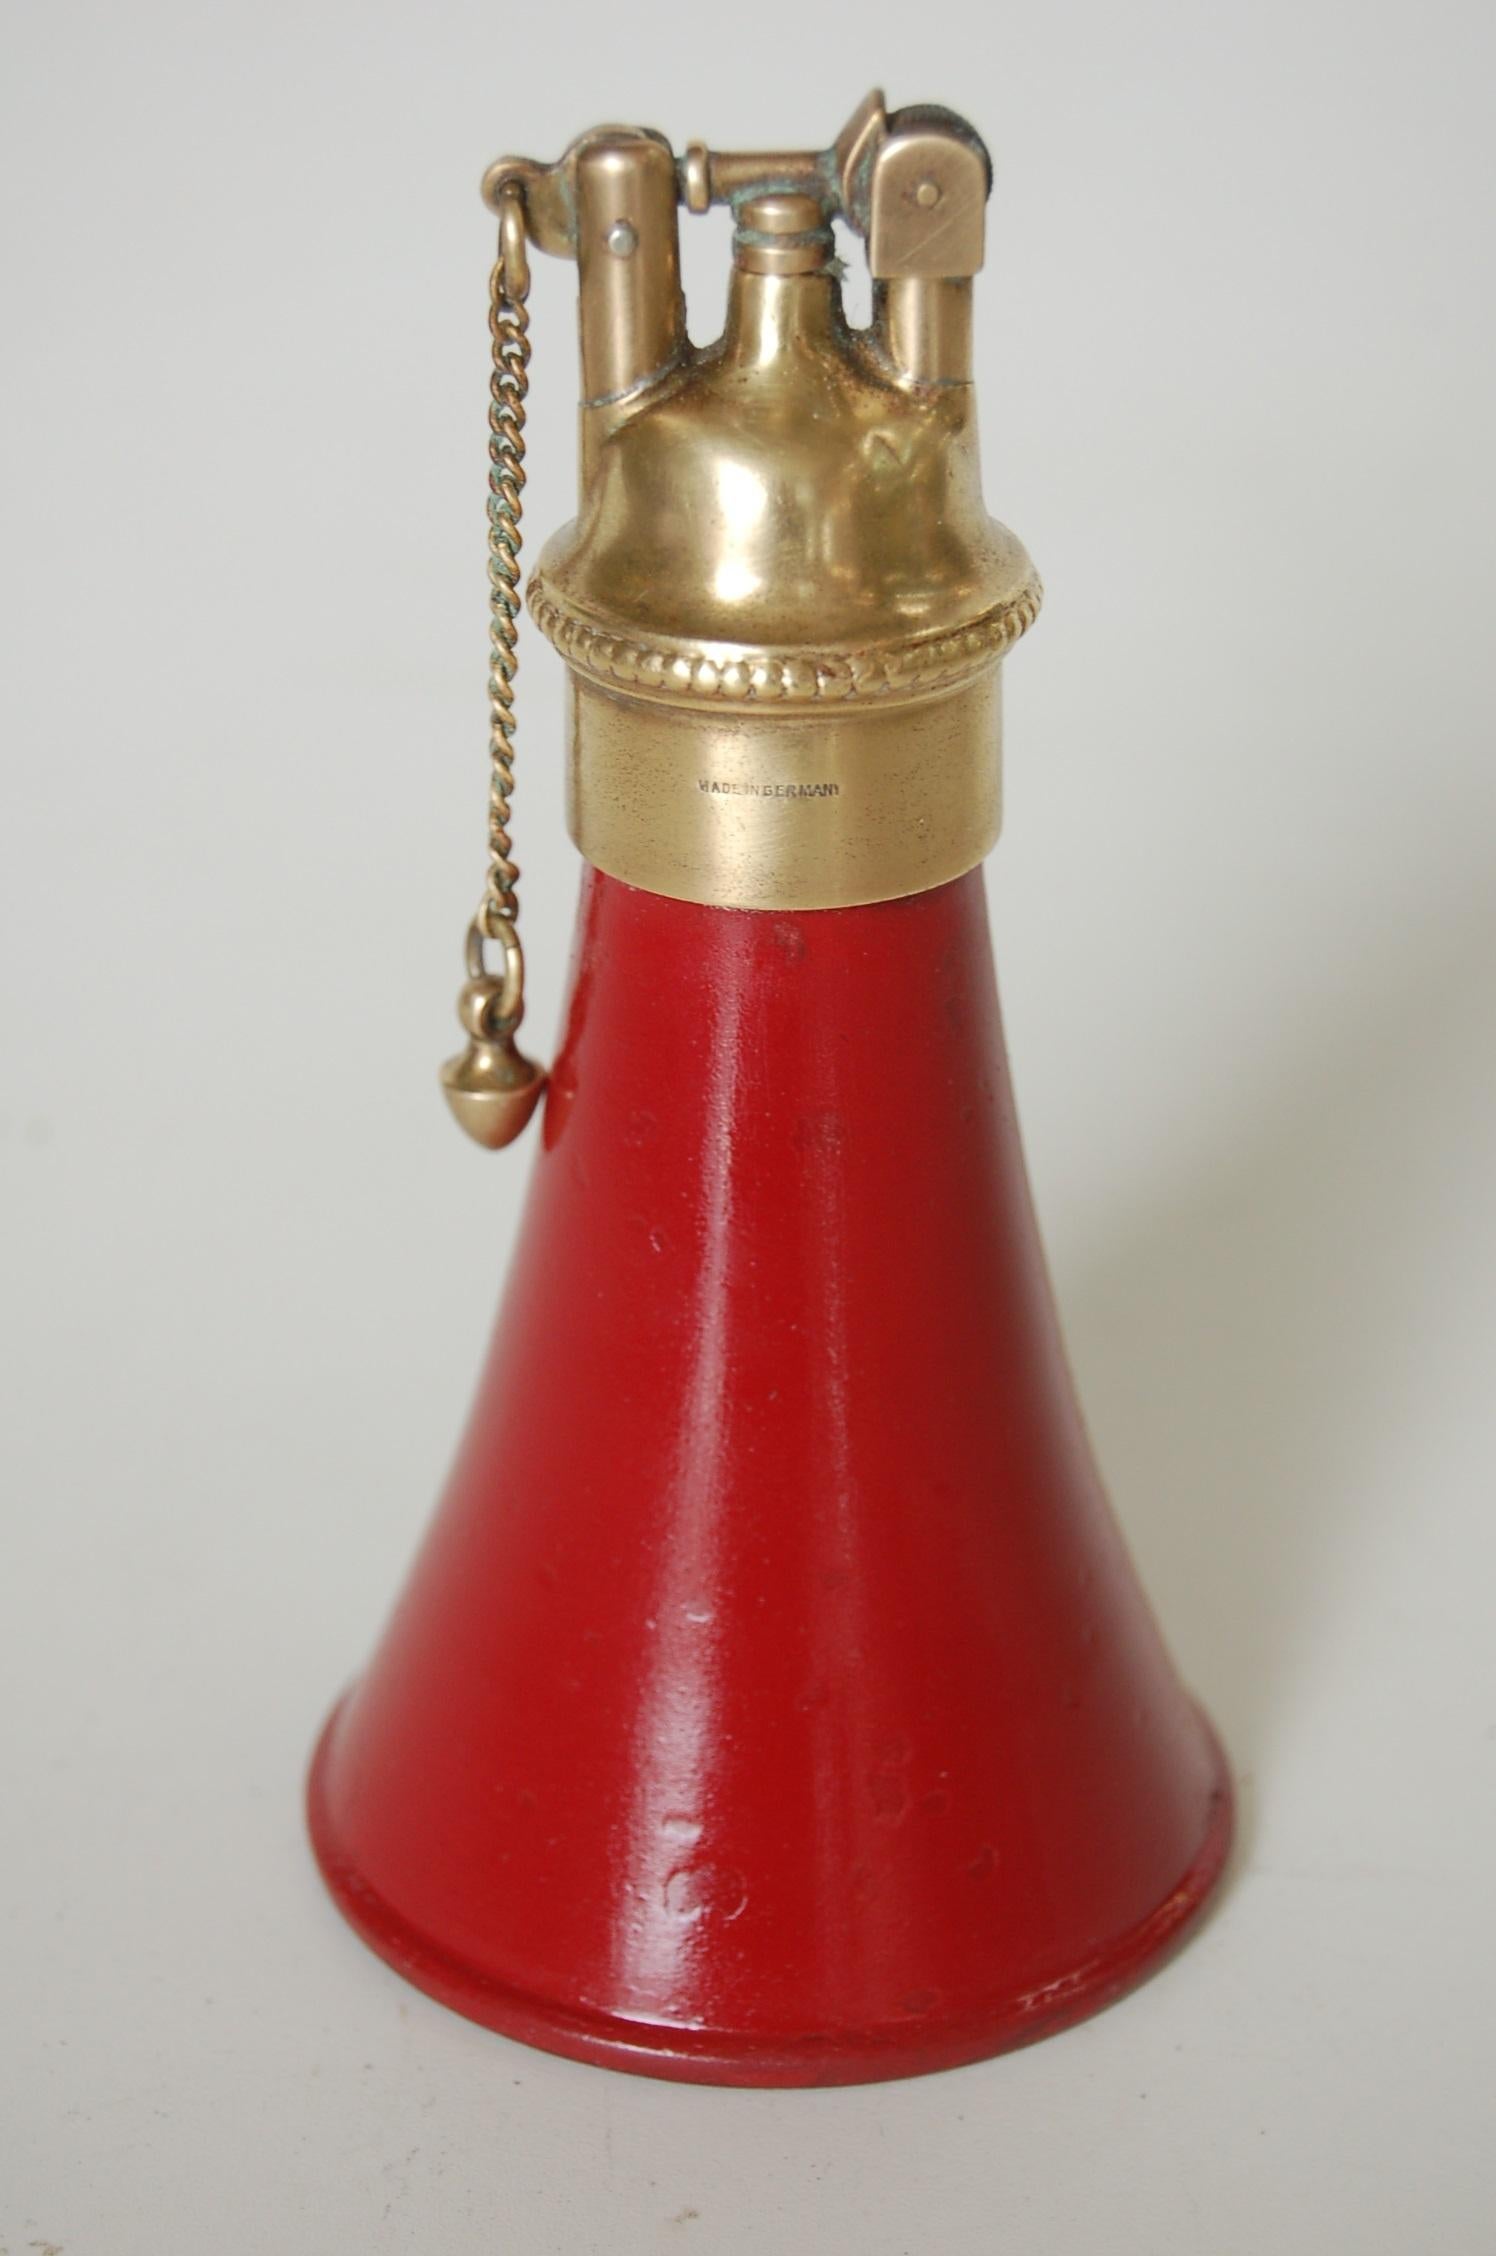 Brass and red horn shaped table petrol lighter with pull chain made in Germany.

Measures: 5.5